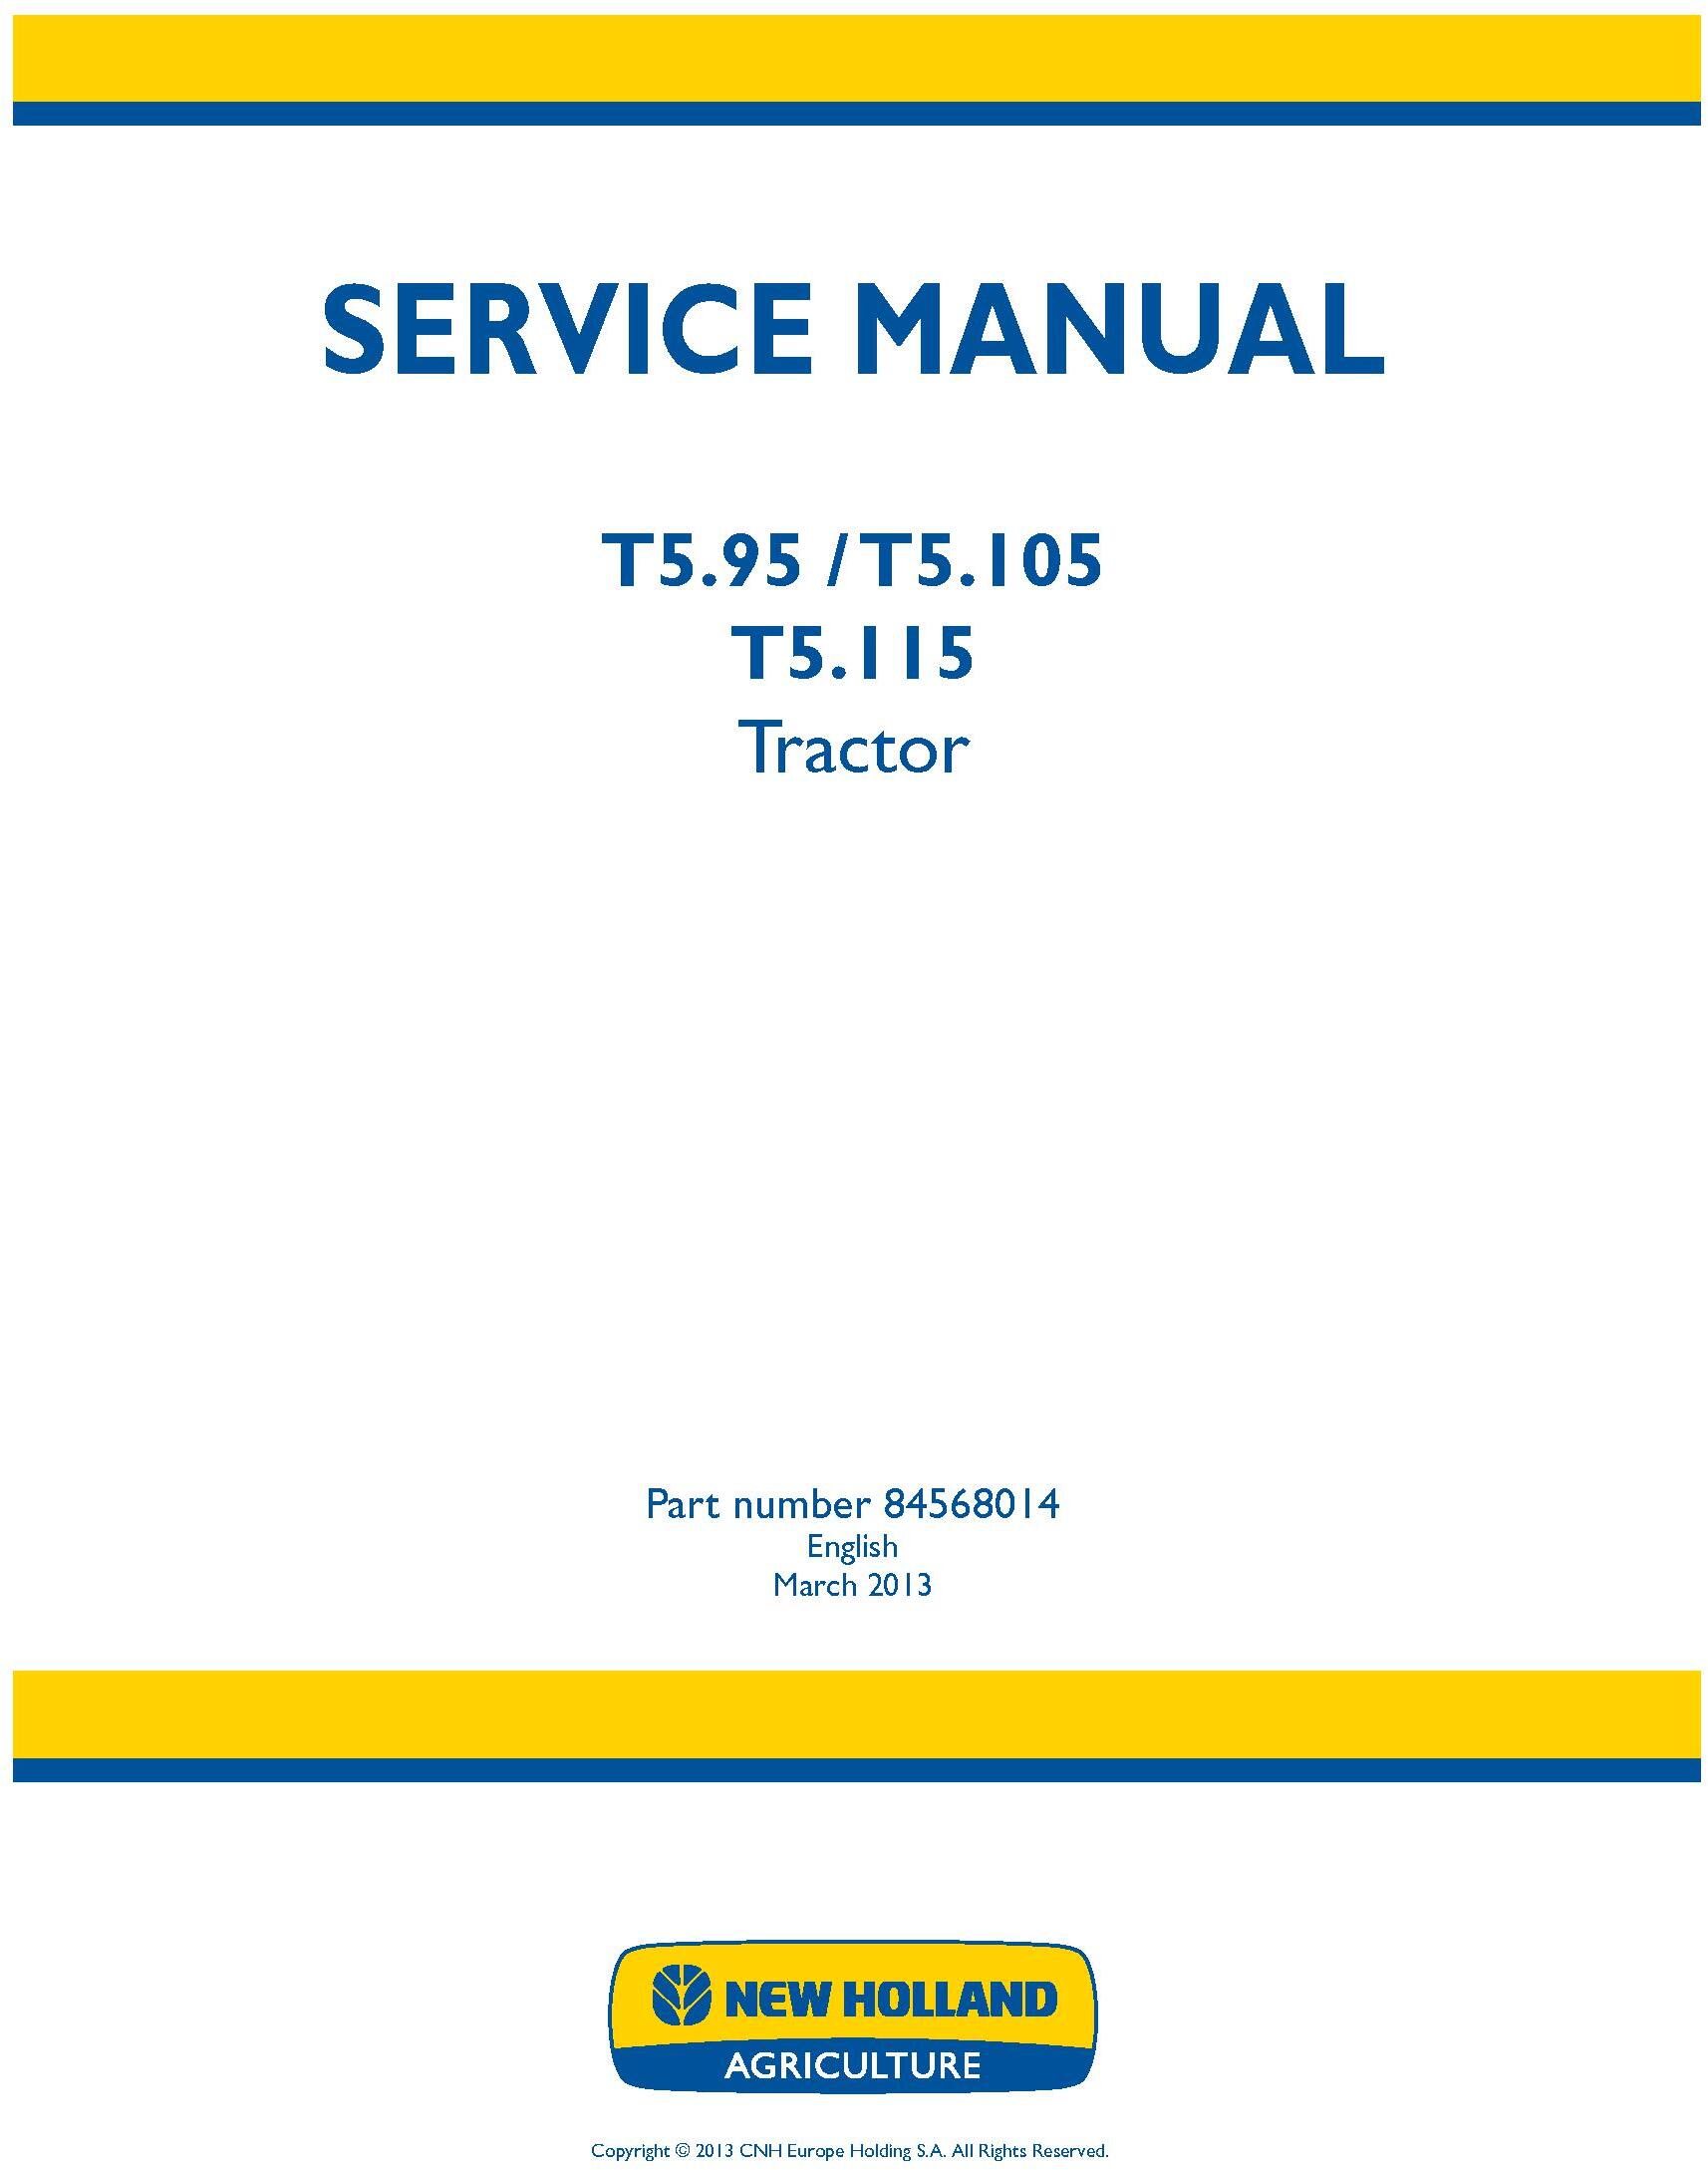 New Holland T5.95, T5.105, T5.115 Tractor Complete Service Manual - 19581